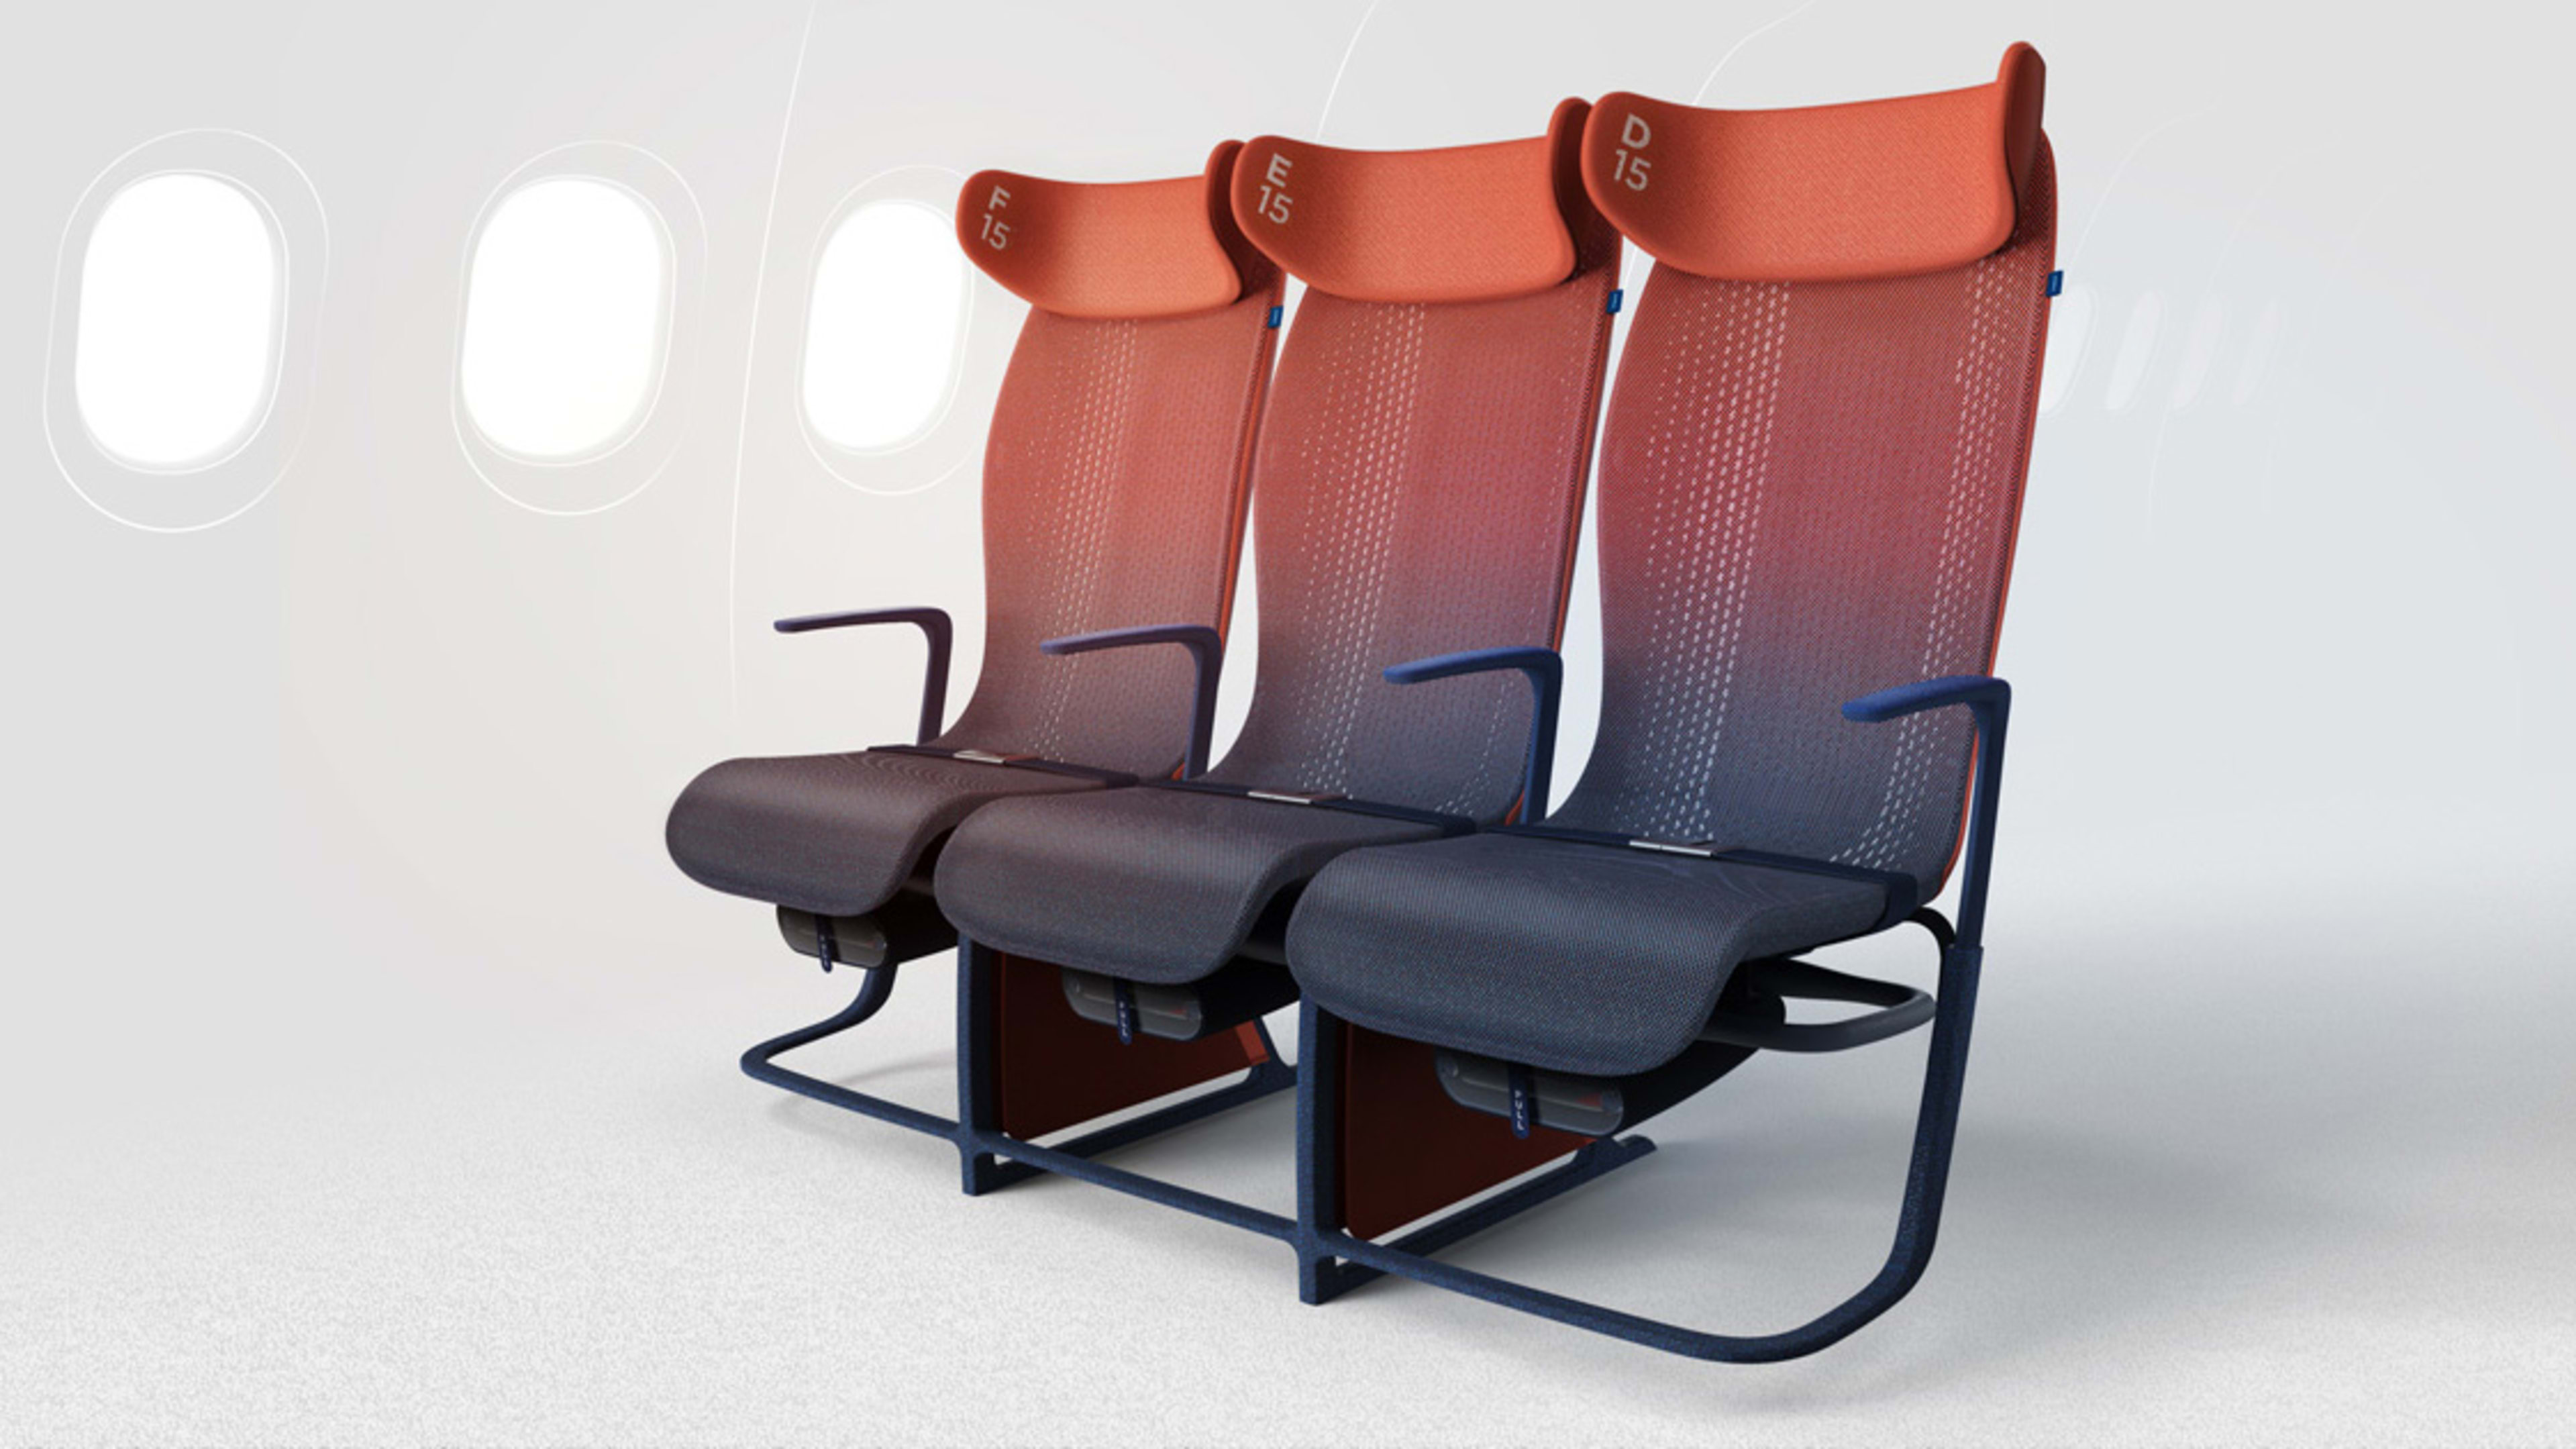 This revolutionary fabric could make flying economy less terrible